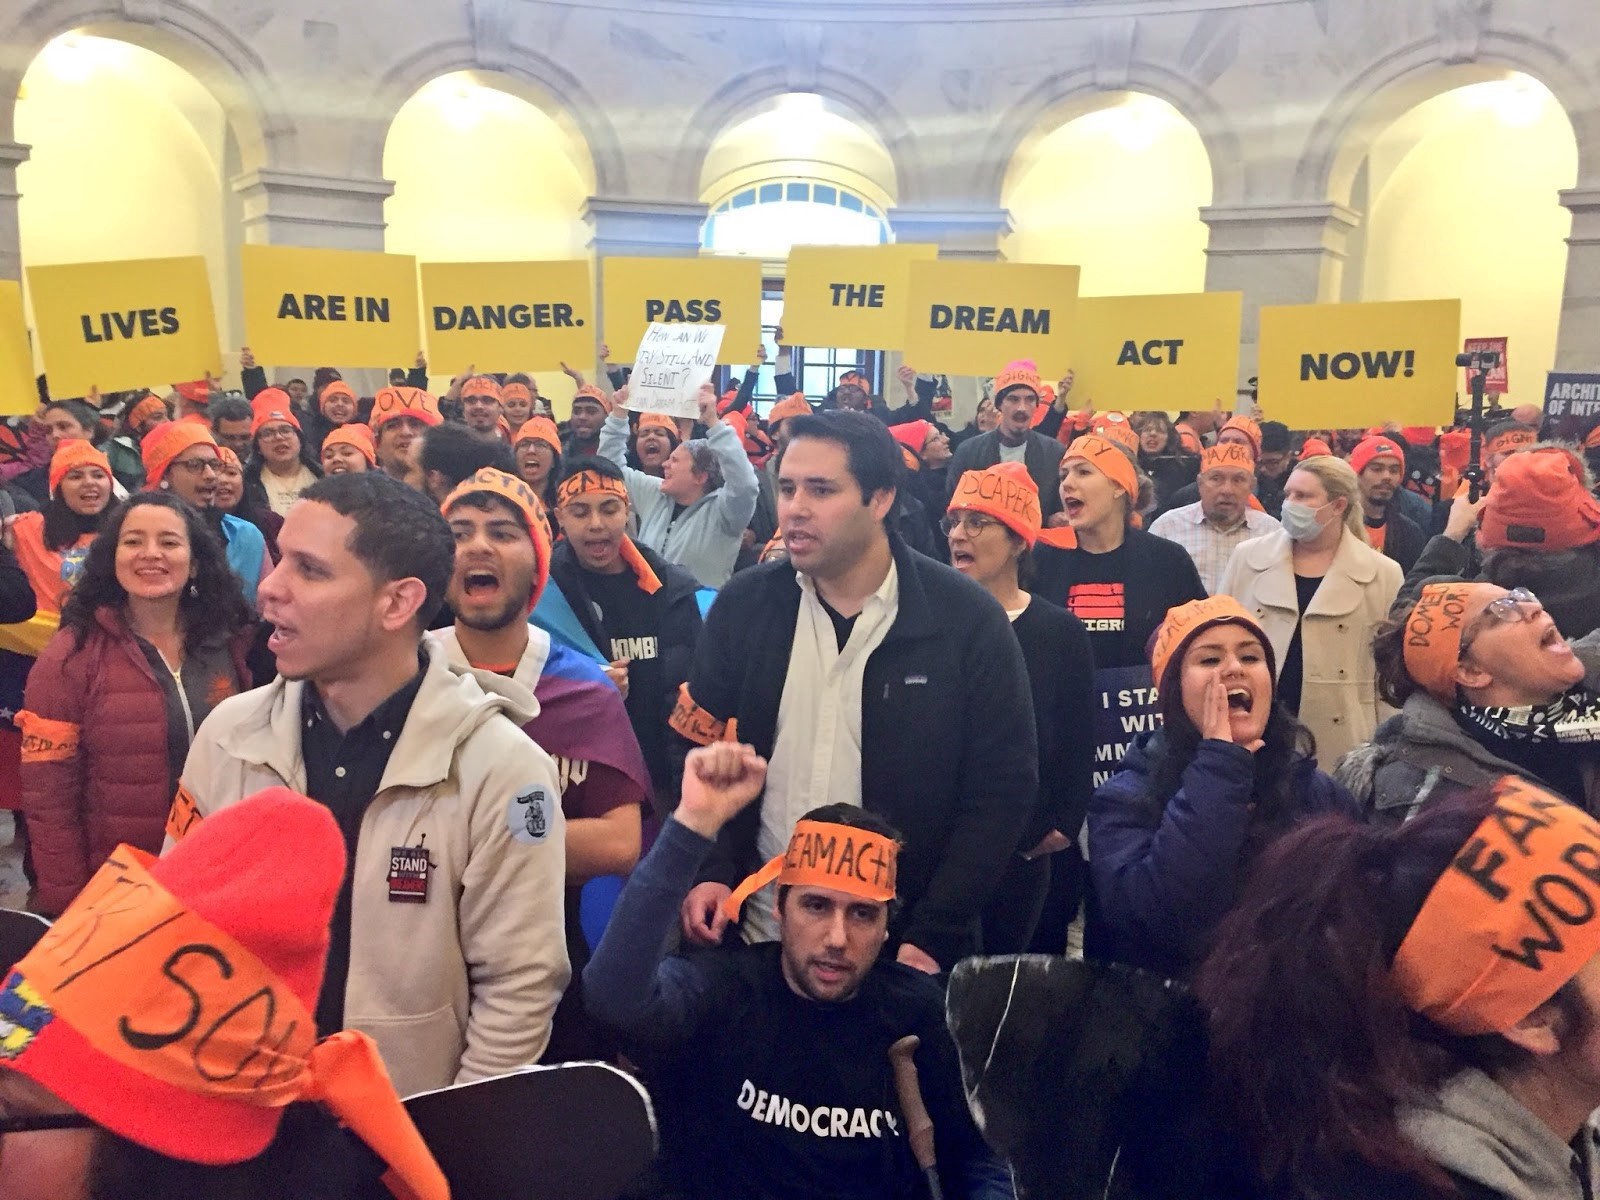 A crowd of protesters, many wearing orange hats and headbands, in the rotunda of the U.S. Capitol. Protesters in the back hold up signs saying "Our lives are in danger. Pass the Dream Act now!"